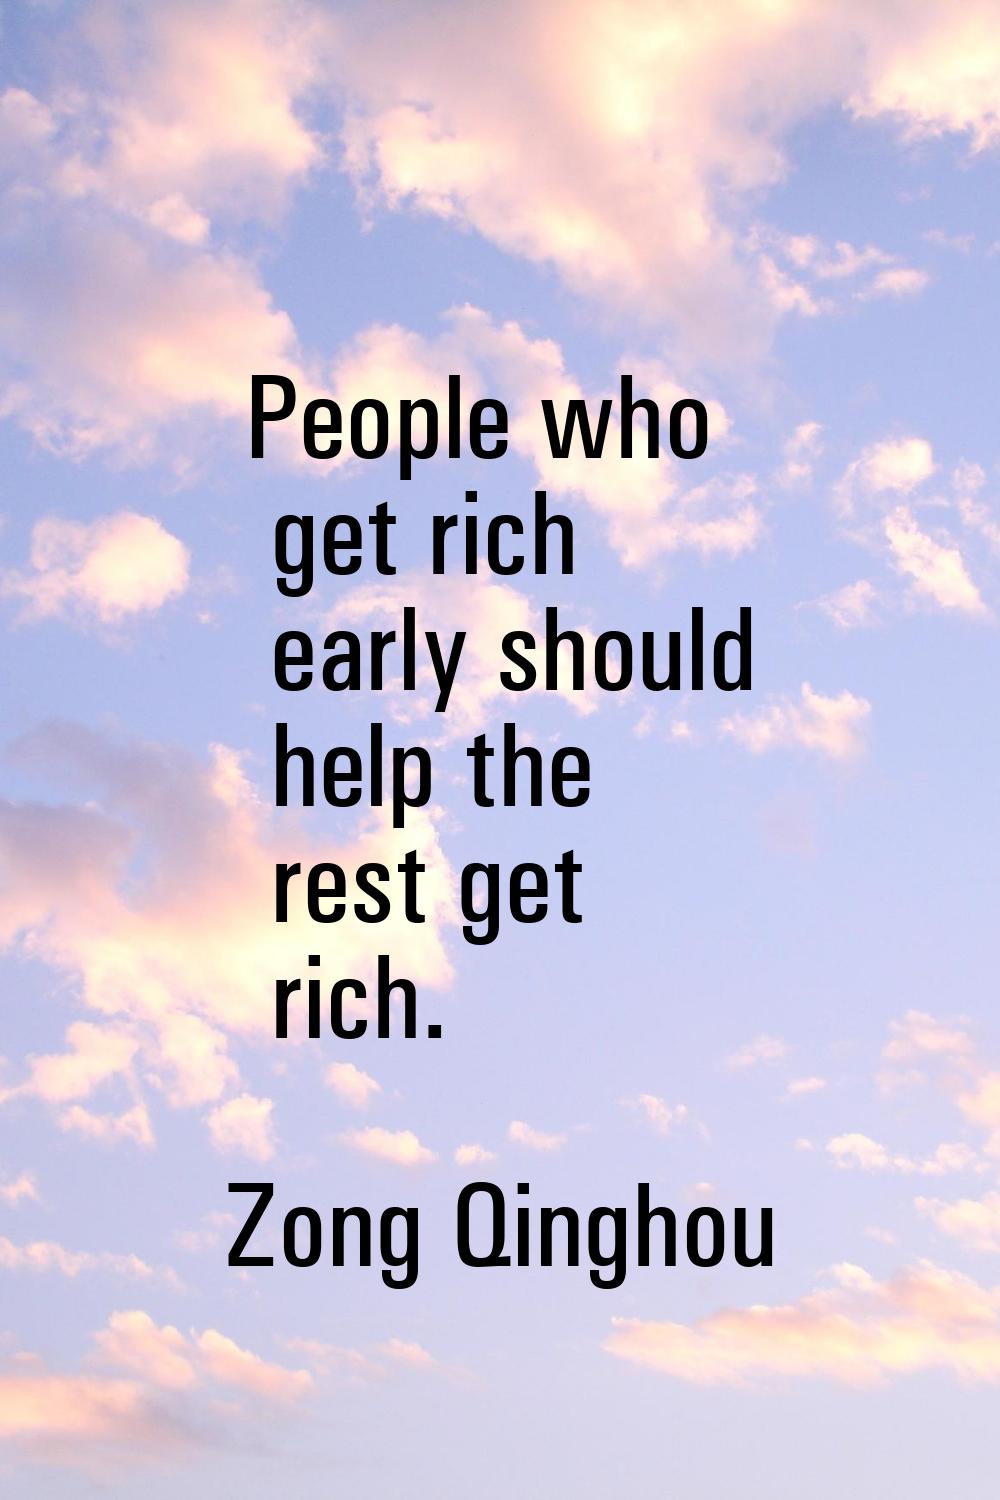 People who get rich early should help the rest get rich.